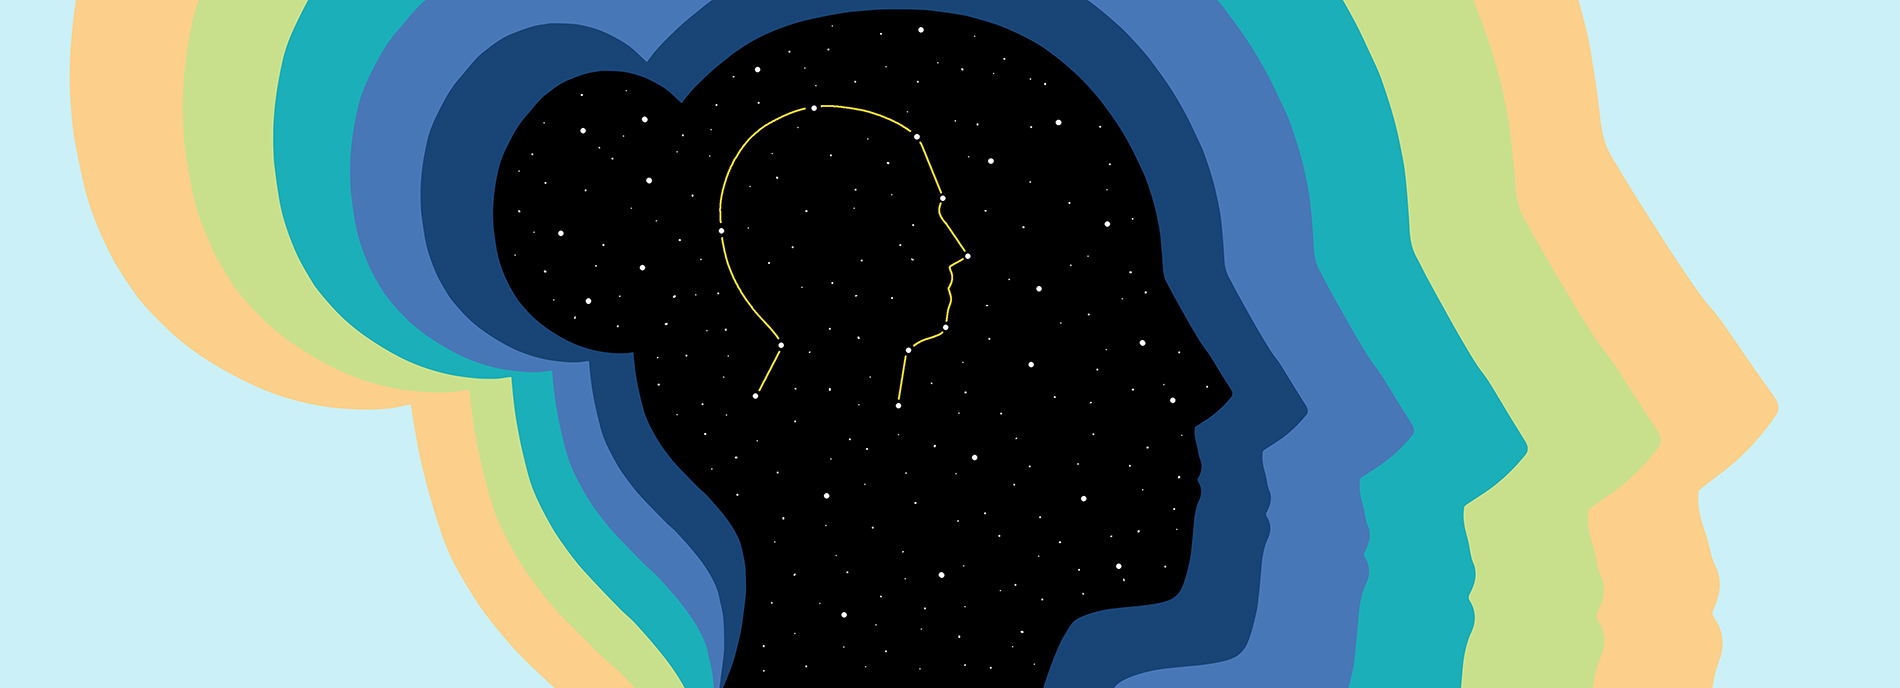 Human head in profile has color auras, and a core made of stars, with a star outline making the shape of another person's head.